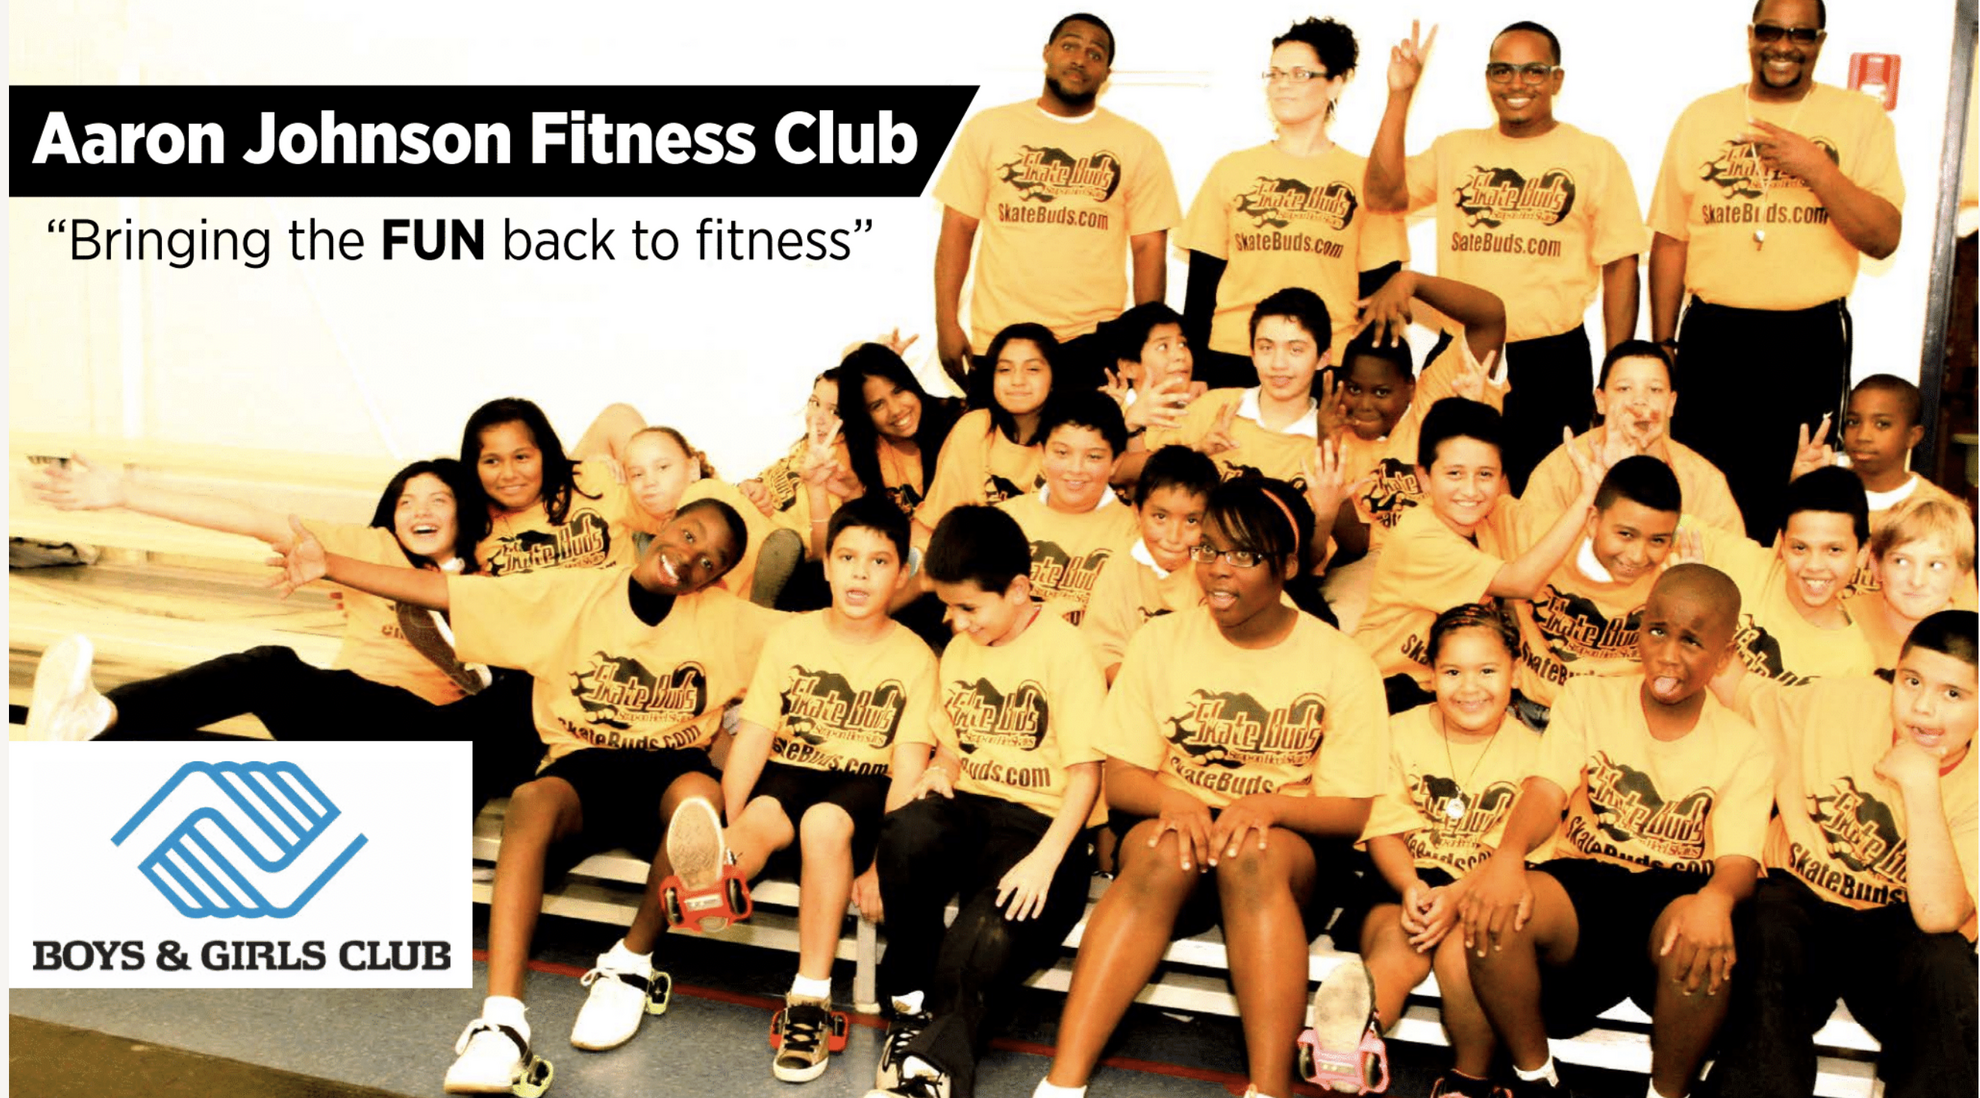 Skate Buds Fitness Camp Drastically Improves Youth Fitness Levels Through Innovative & Engaging Programming